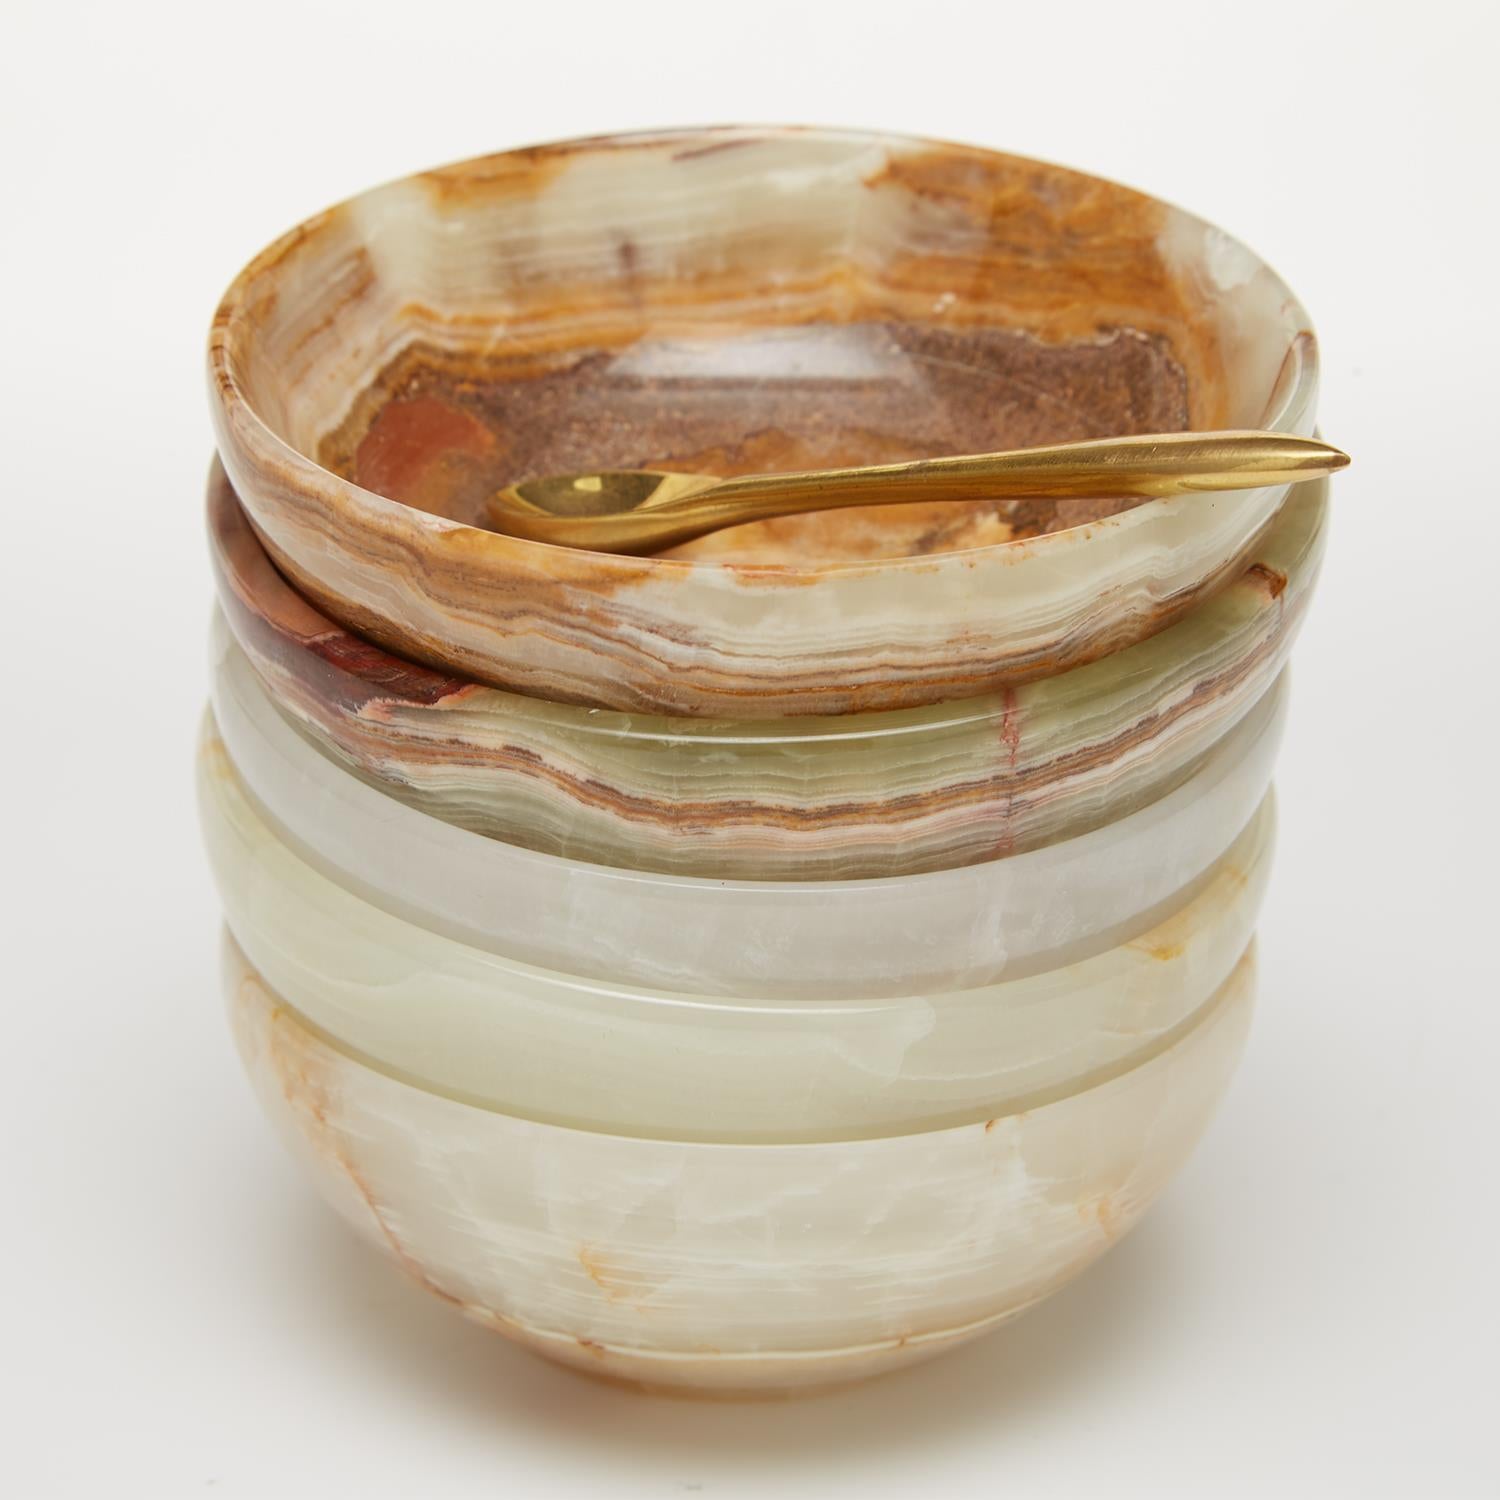 Onyx-Marble Bowl with Golden Spoon